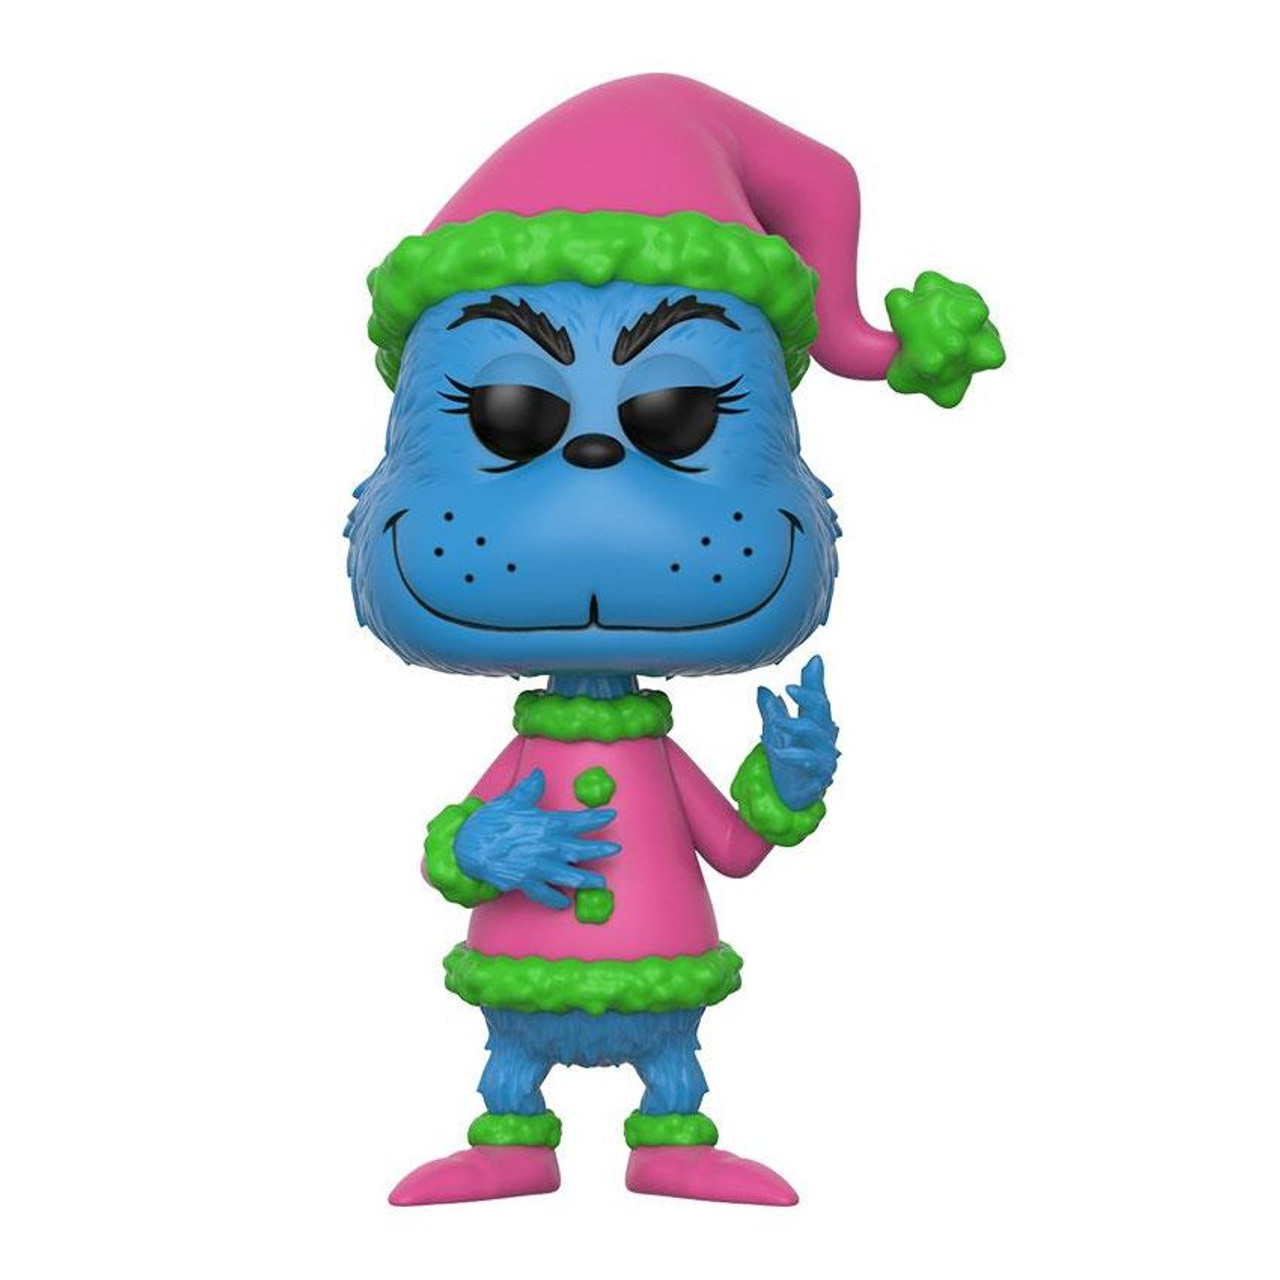 Books THE GRINCH in Santa Outfit 3.75" Vinyl Figure #12 Blue Chase Funko POP 